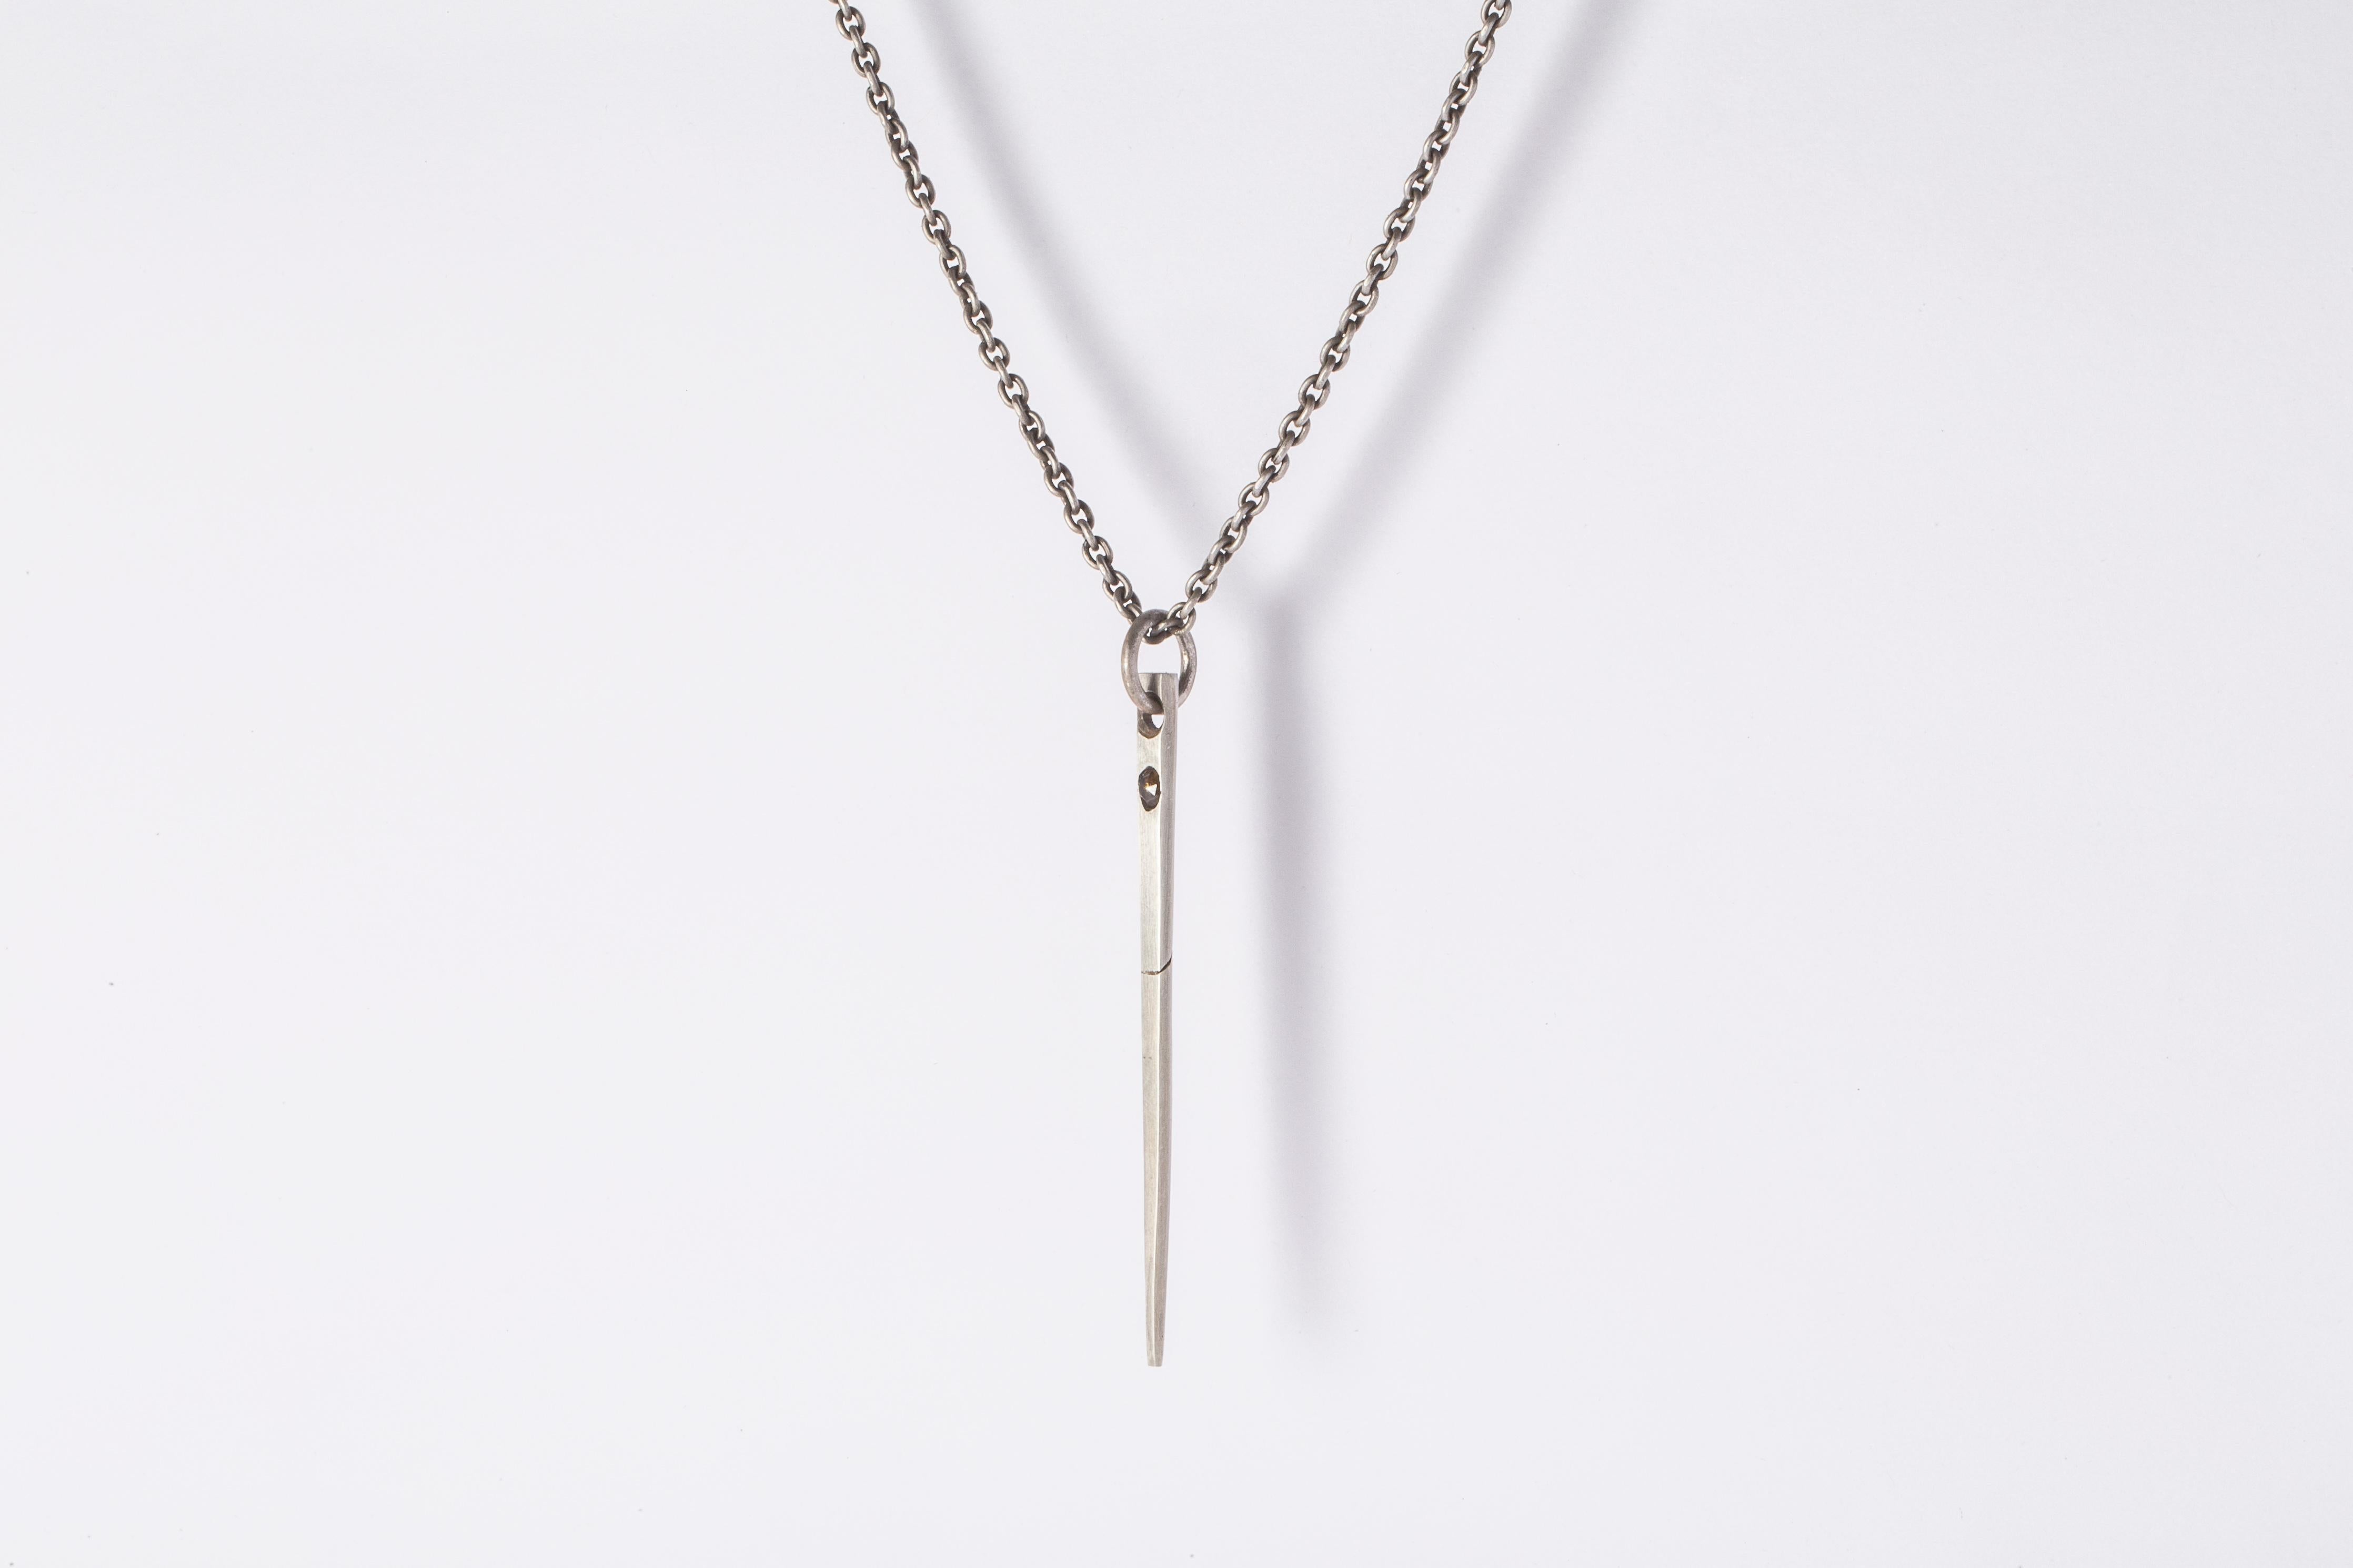 Spike Necklace (0.3 CT, Chunky Diamond Slab, DA+DIA) In New Condition For Sale In Hong Kong, Hong Kong Island